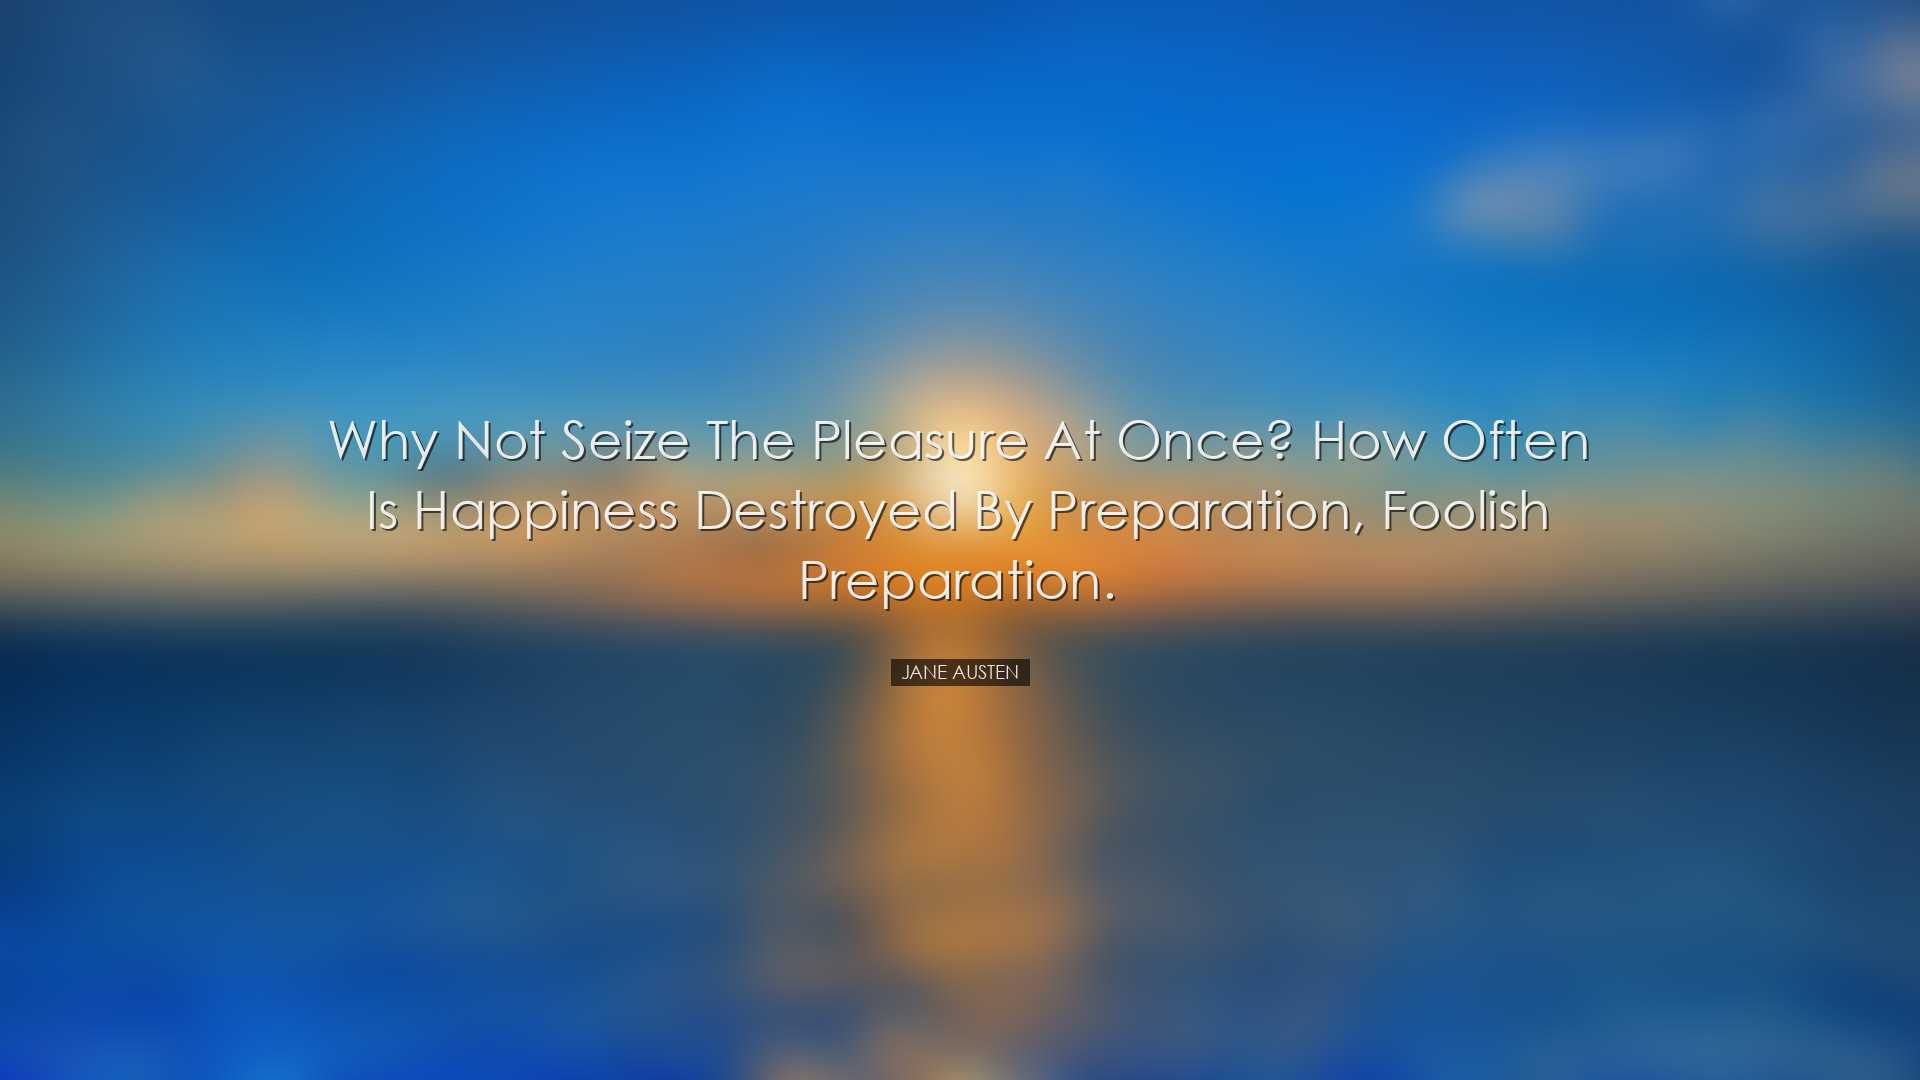 Why not seize the pleasure at once? How often is happiness destroy